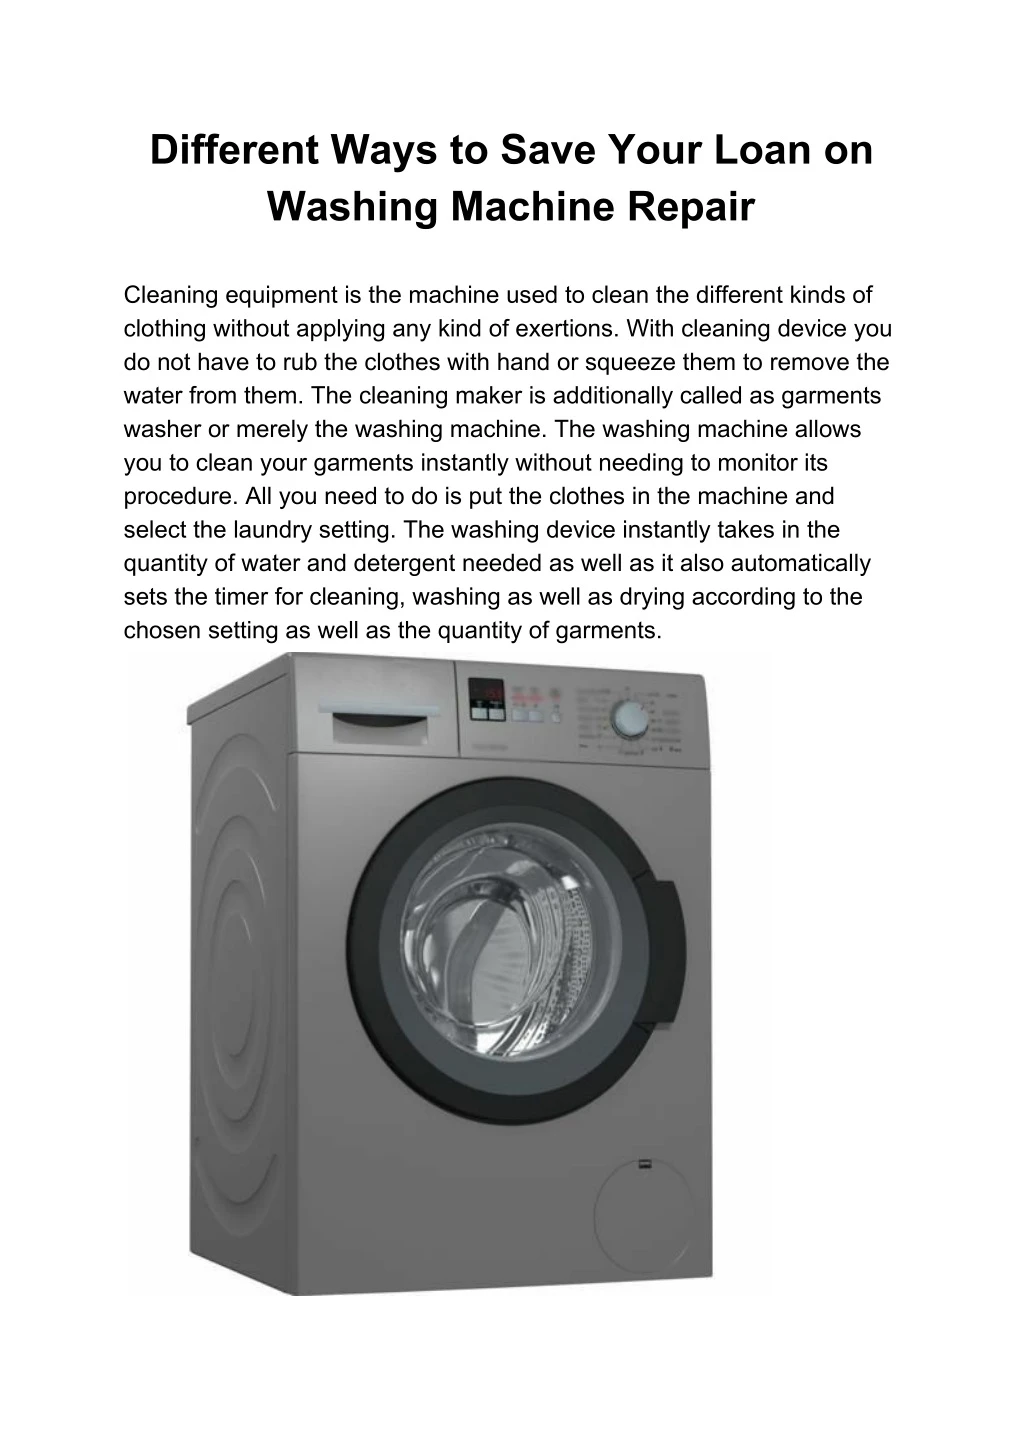 different ways to save your loan on washing